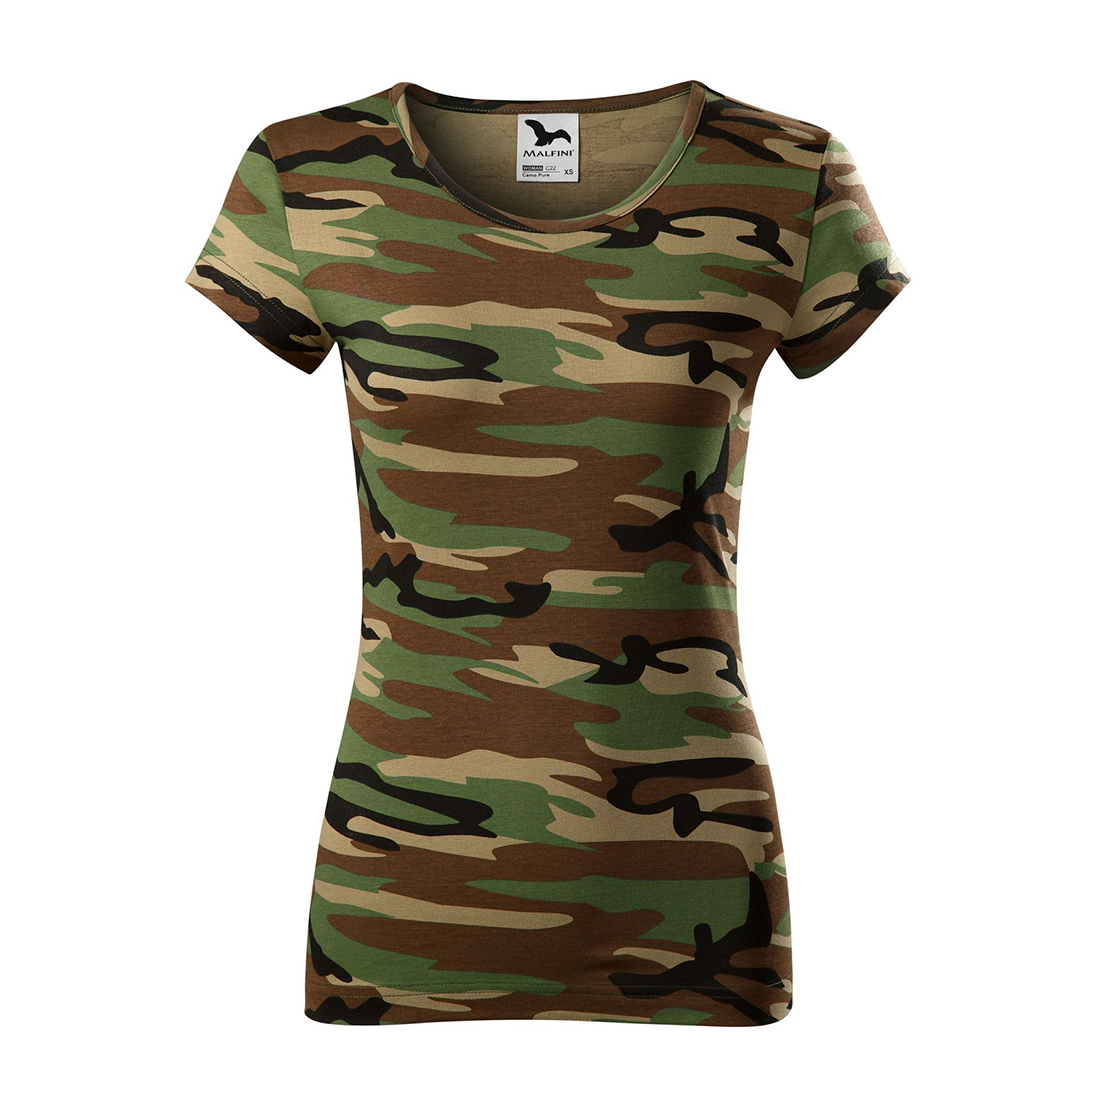 Women's T-shirt with silicon finish - Safetywear